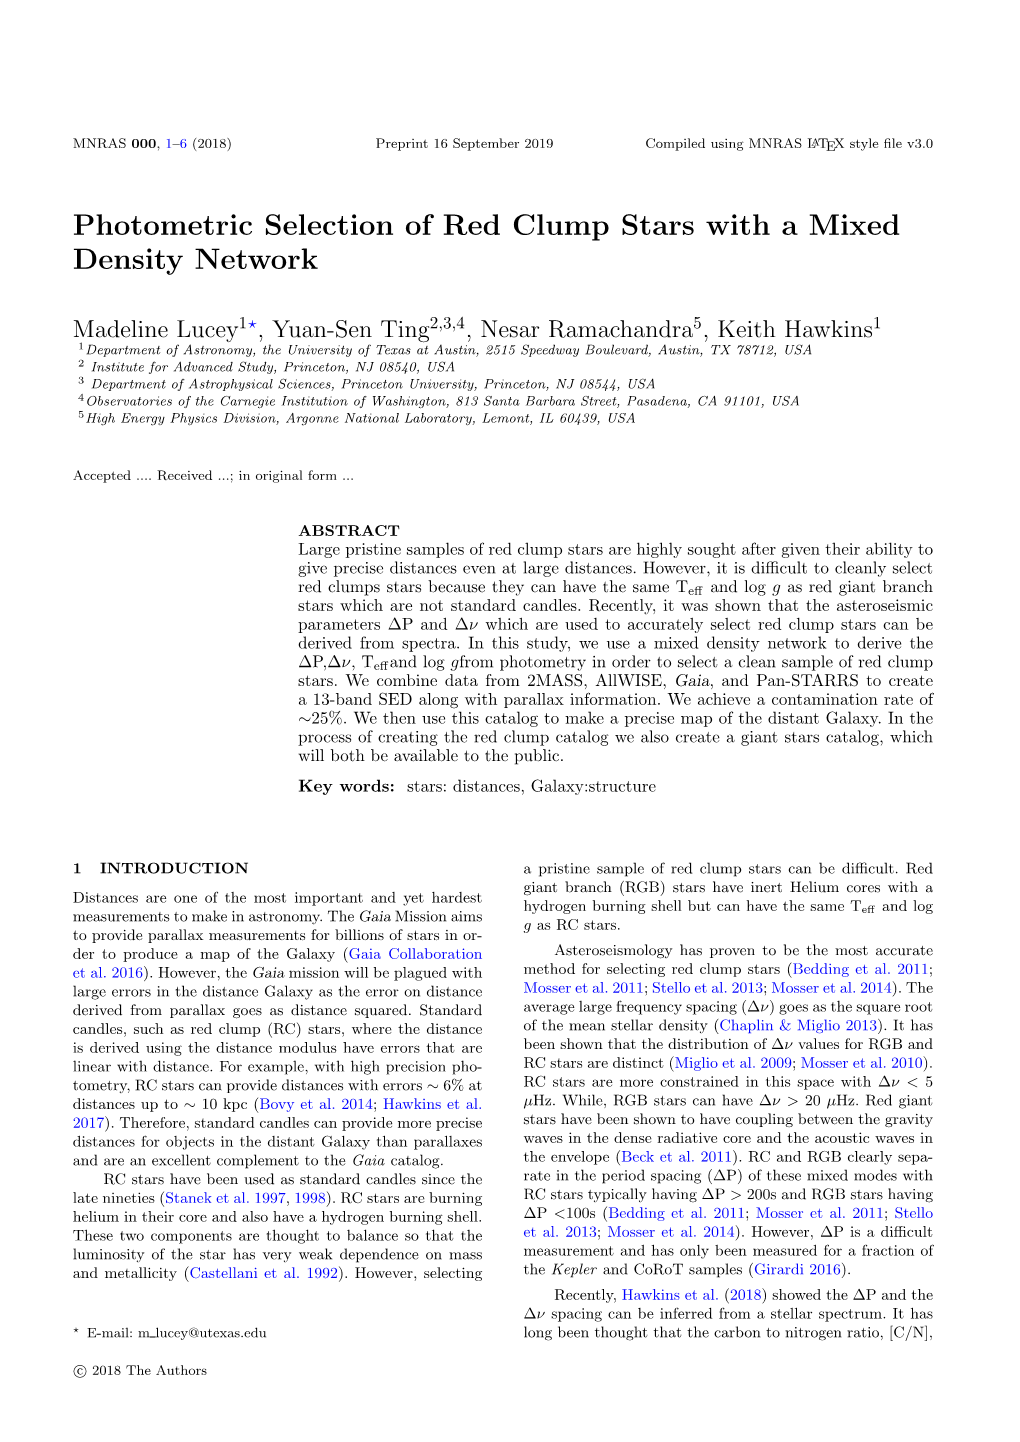 Photometric Selection of Red Clump Stars with a Mixed Density Network